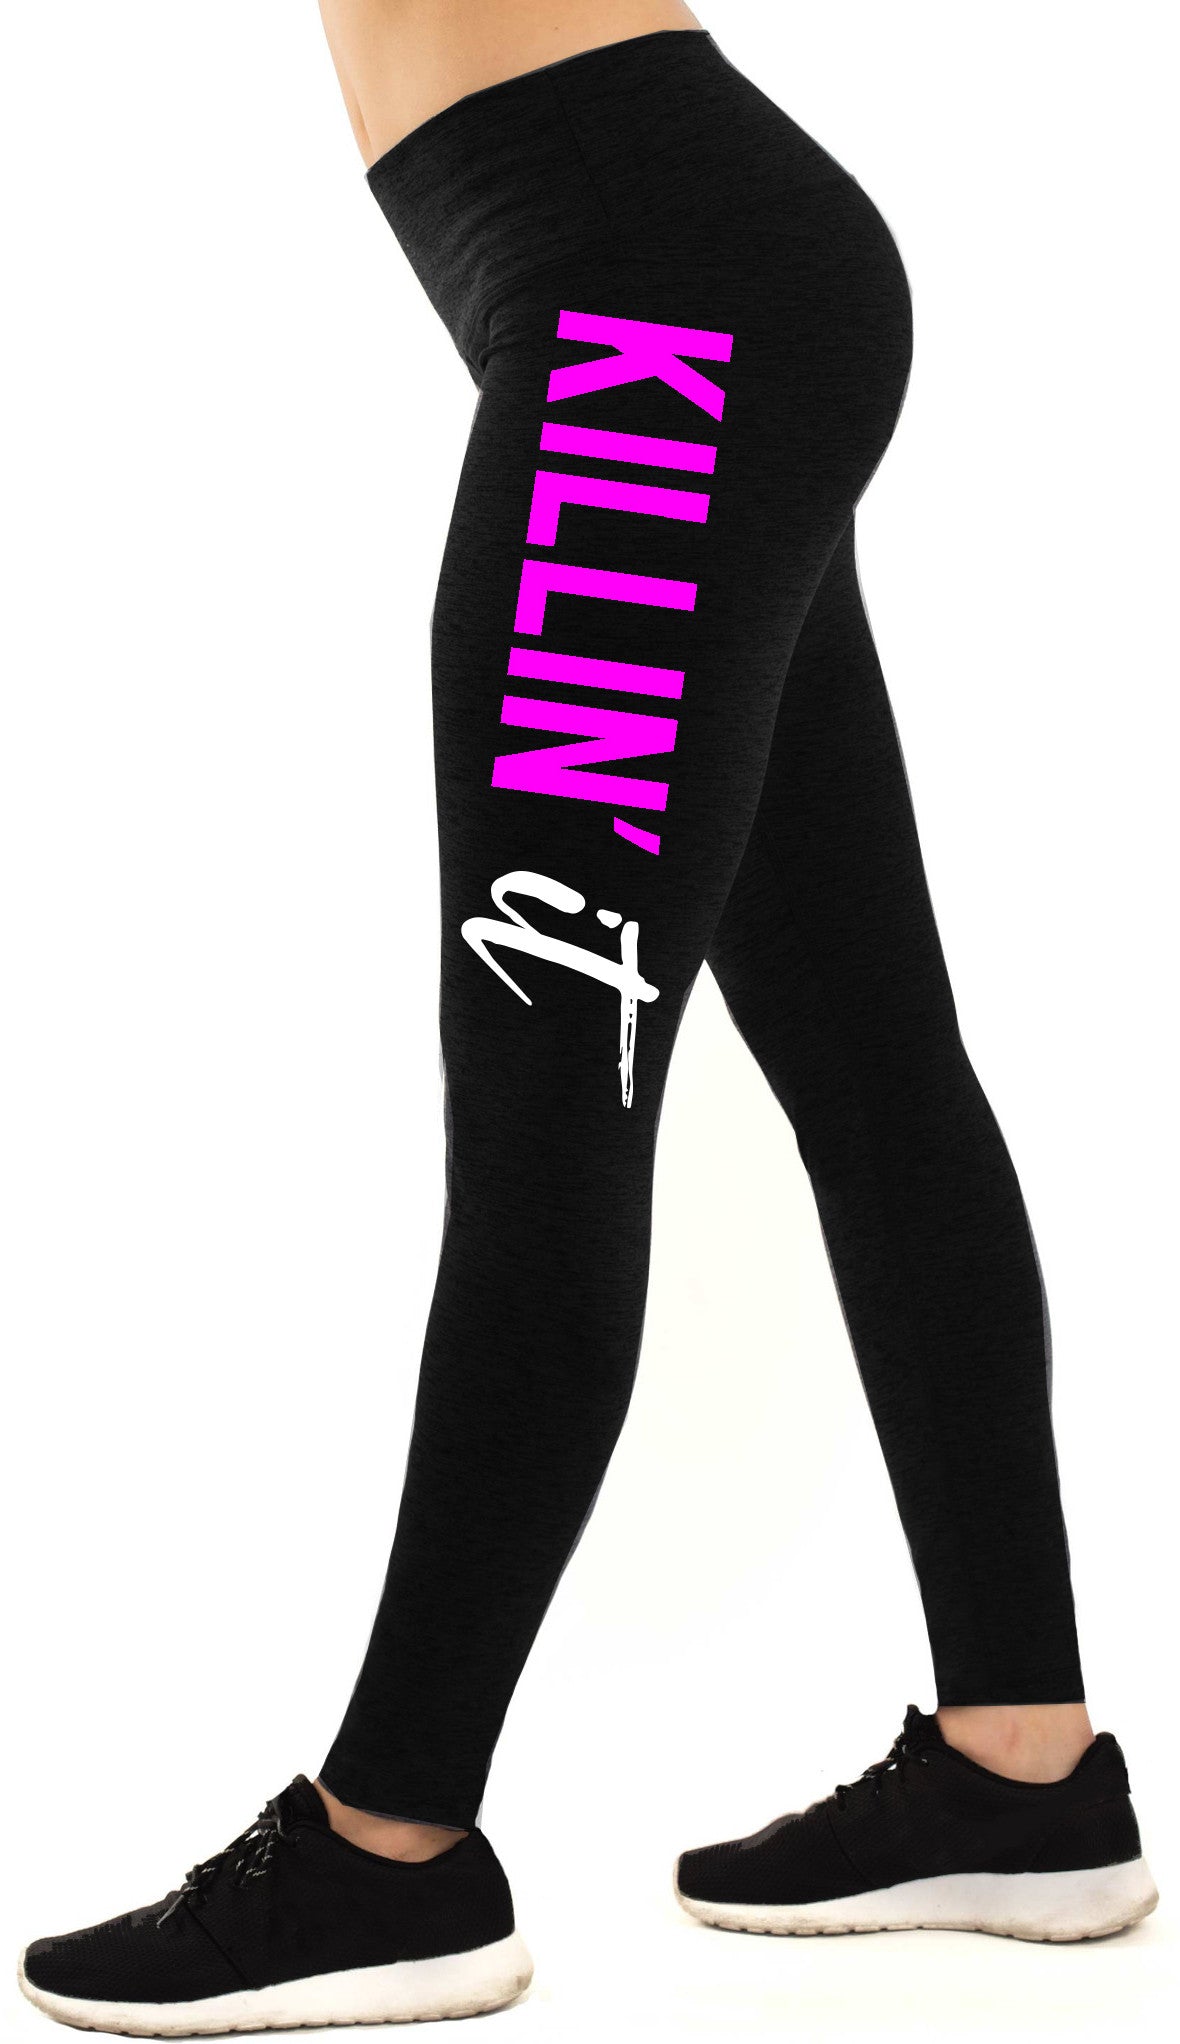 KILLIN\' IT Workout Leggings, NobullWoman Apparel and Print Pink – White Black with